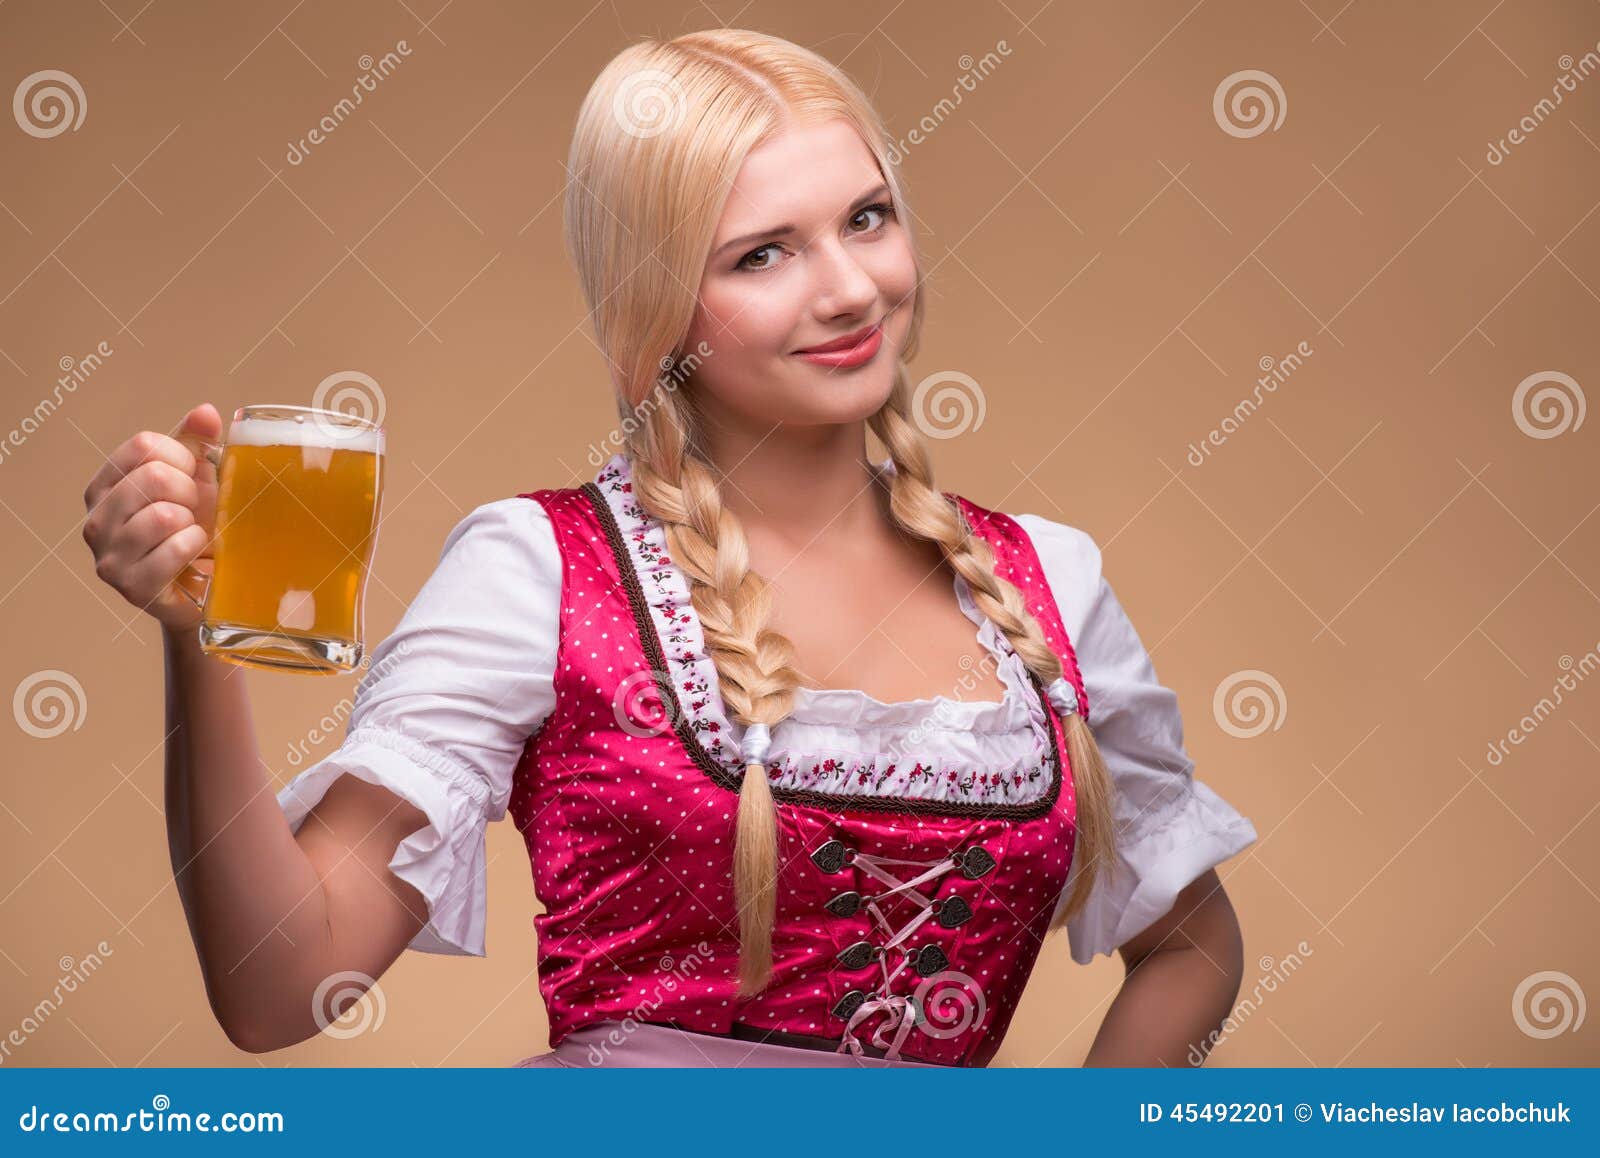 Young Blonde Wearing Dirndl Stock Image - Image of girl, friendly: 45492201